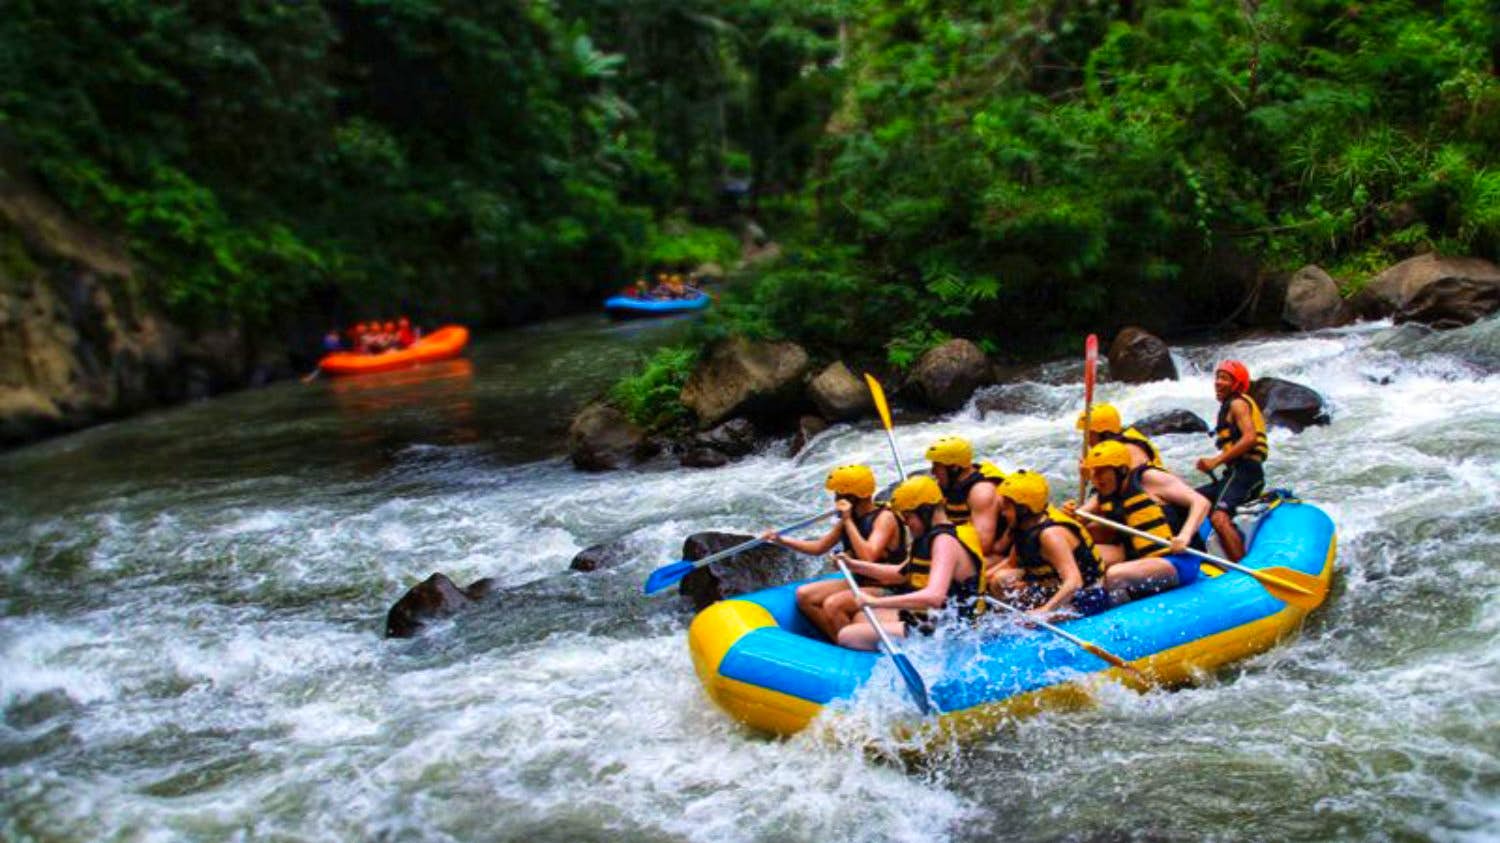 Combo: Swing at Bali Swing and White Water Rafting at Ayung River with Lunch